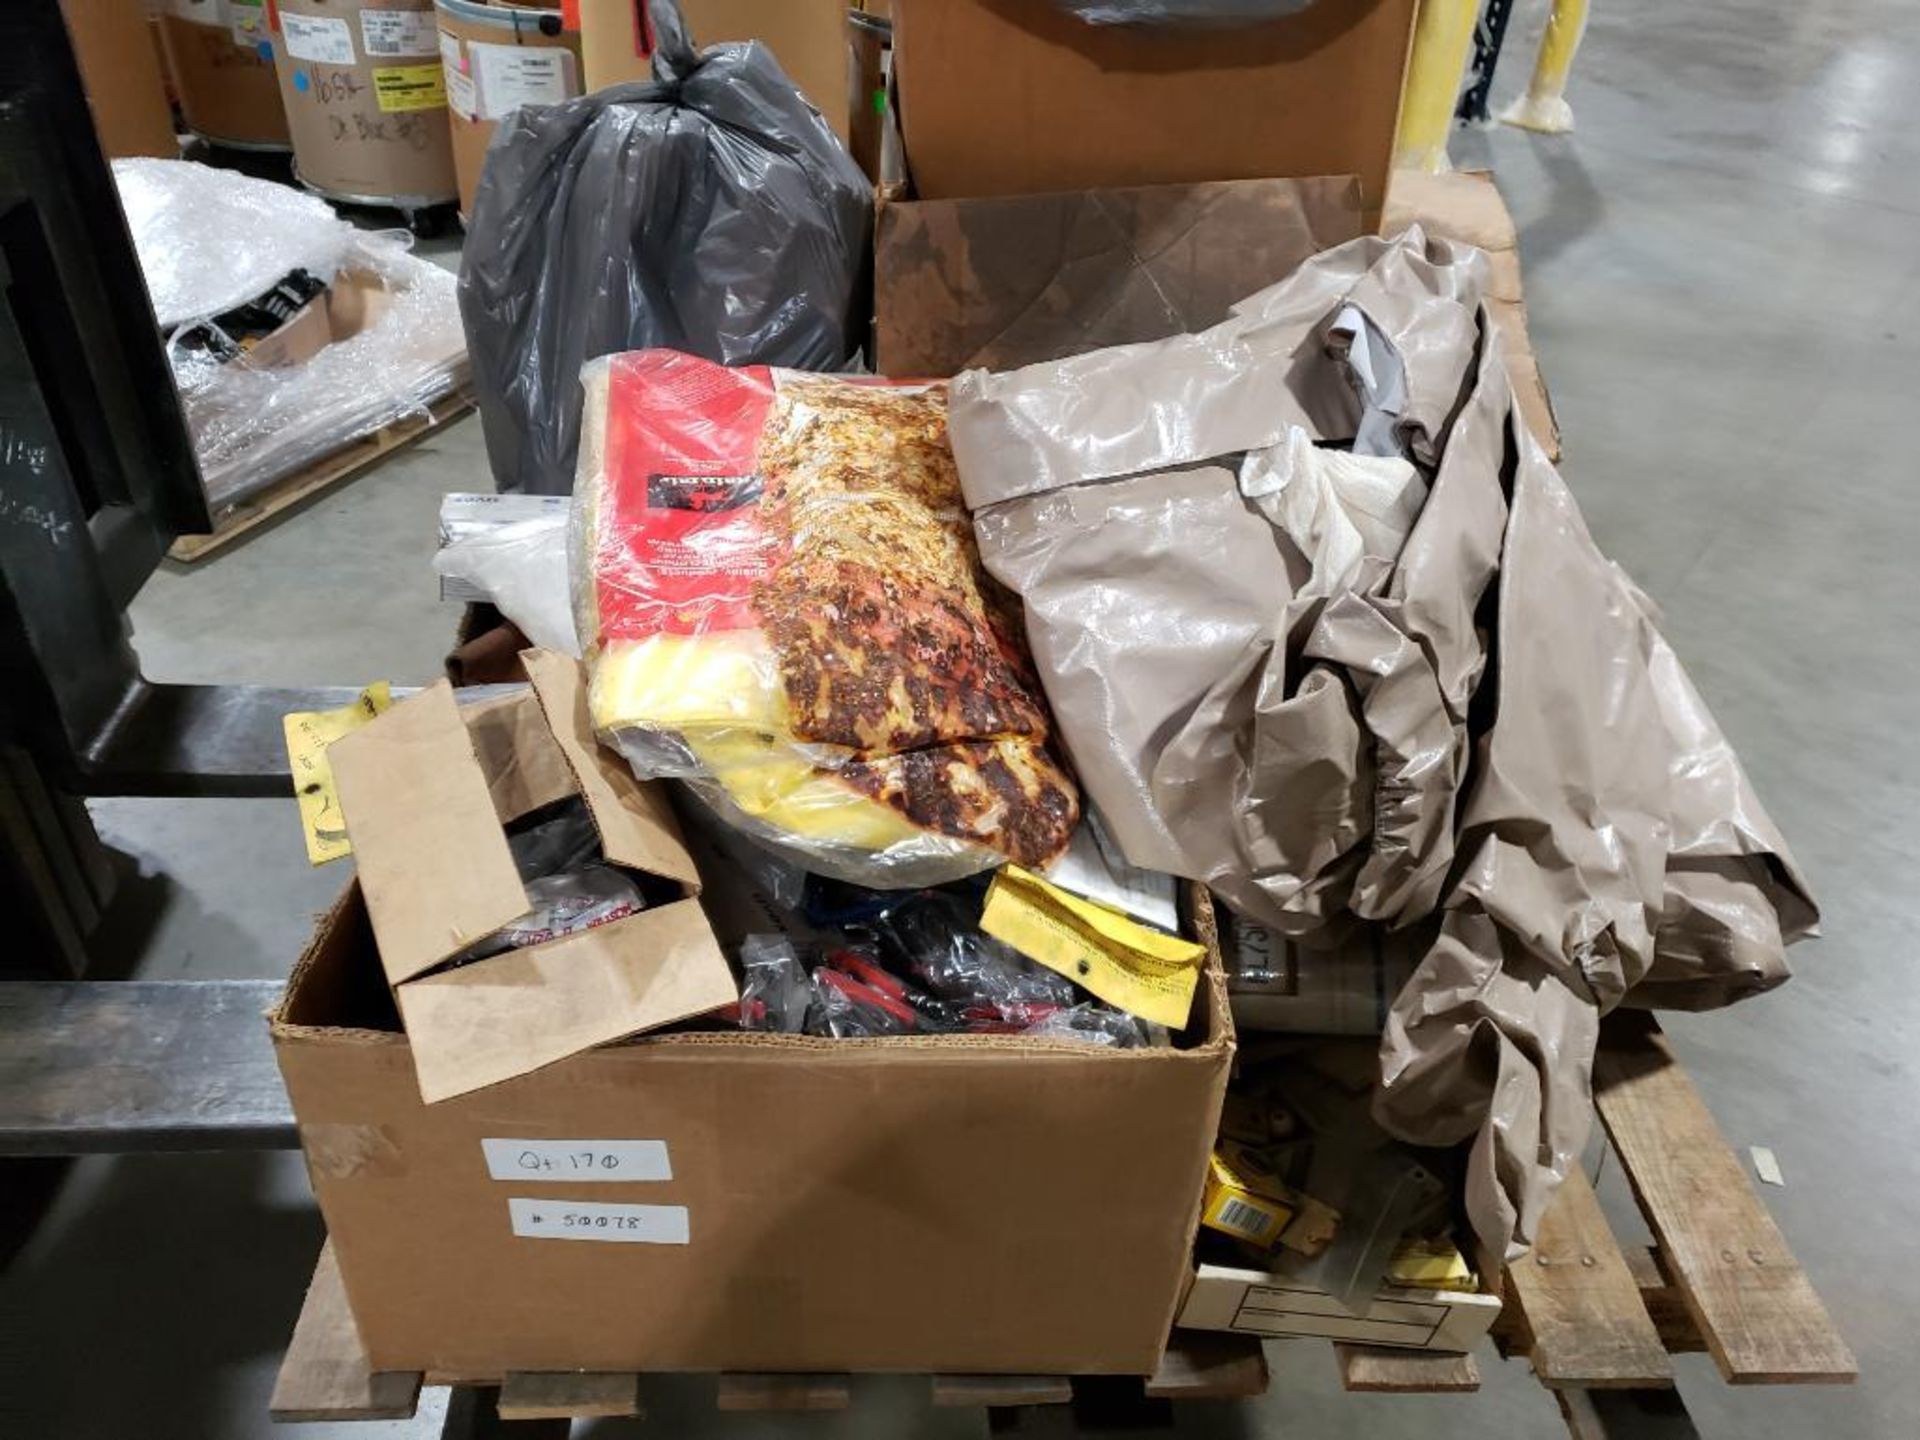 Pallet of assorted tarps, safety goggles, and other parts.